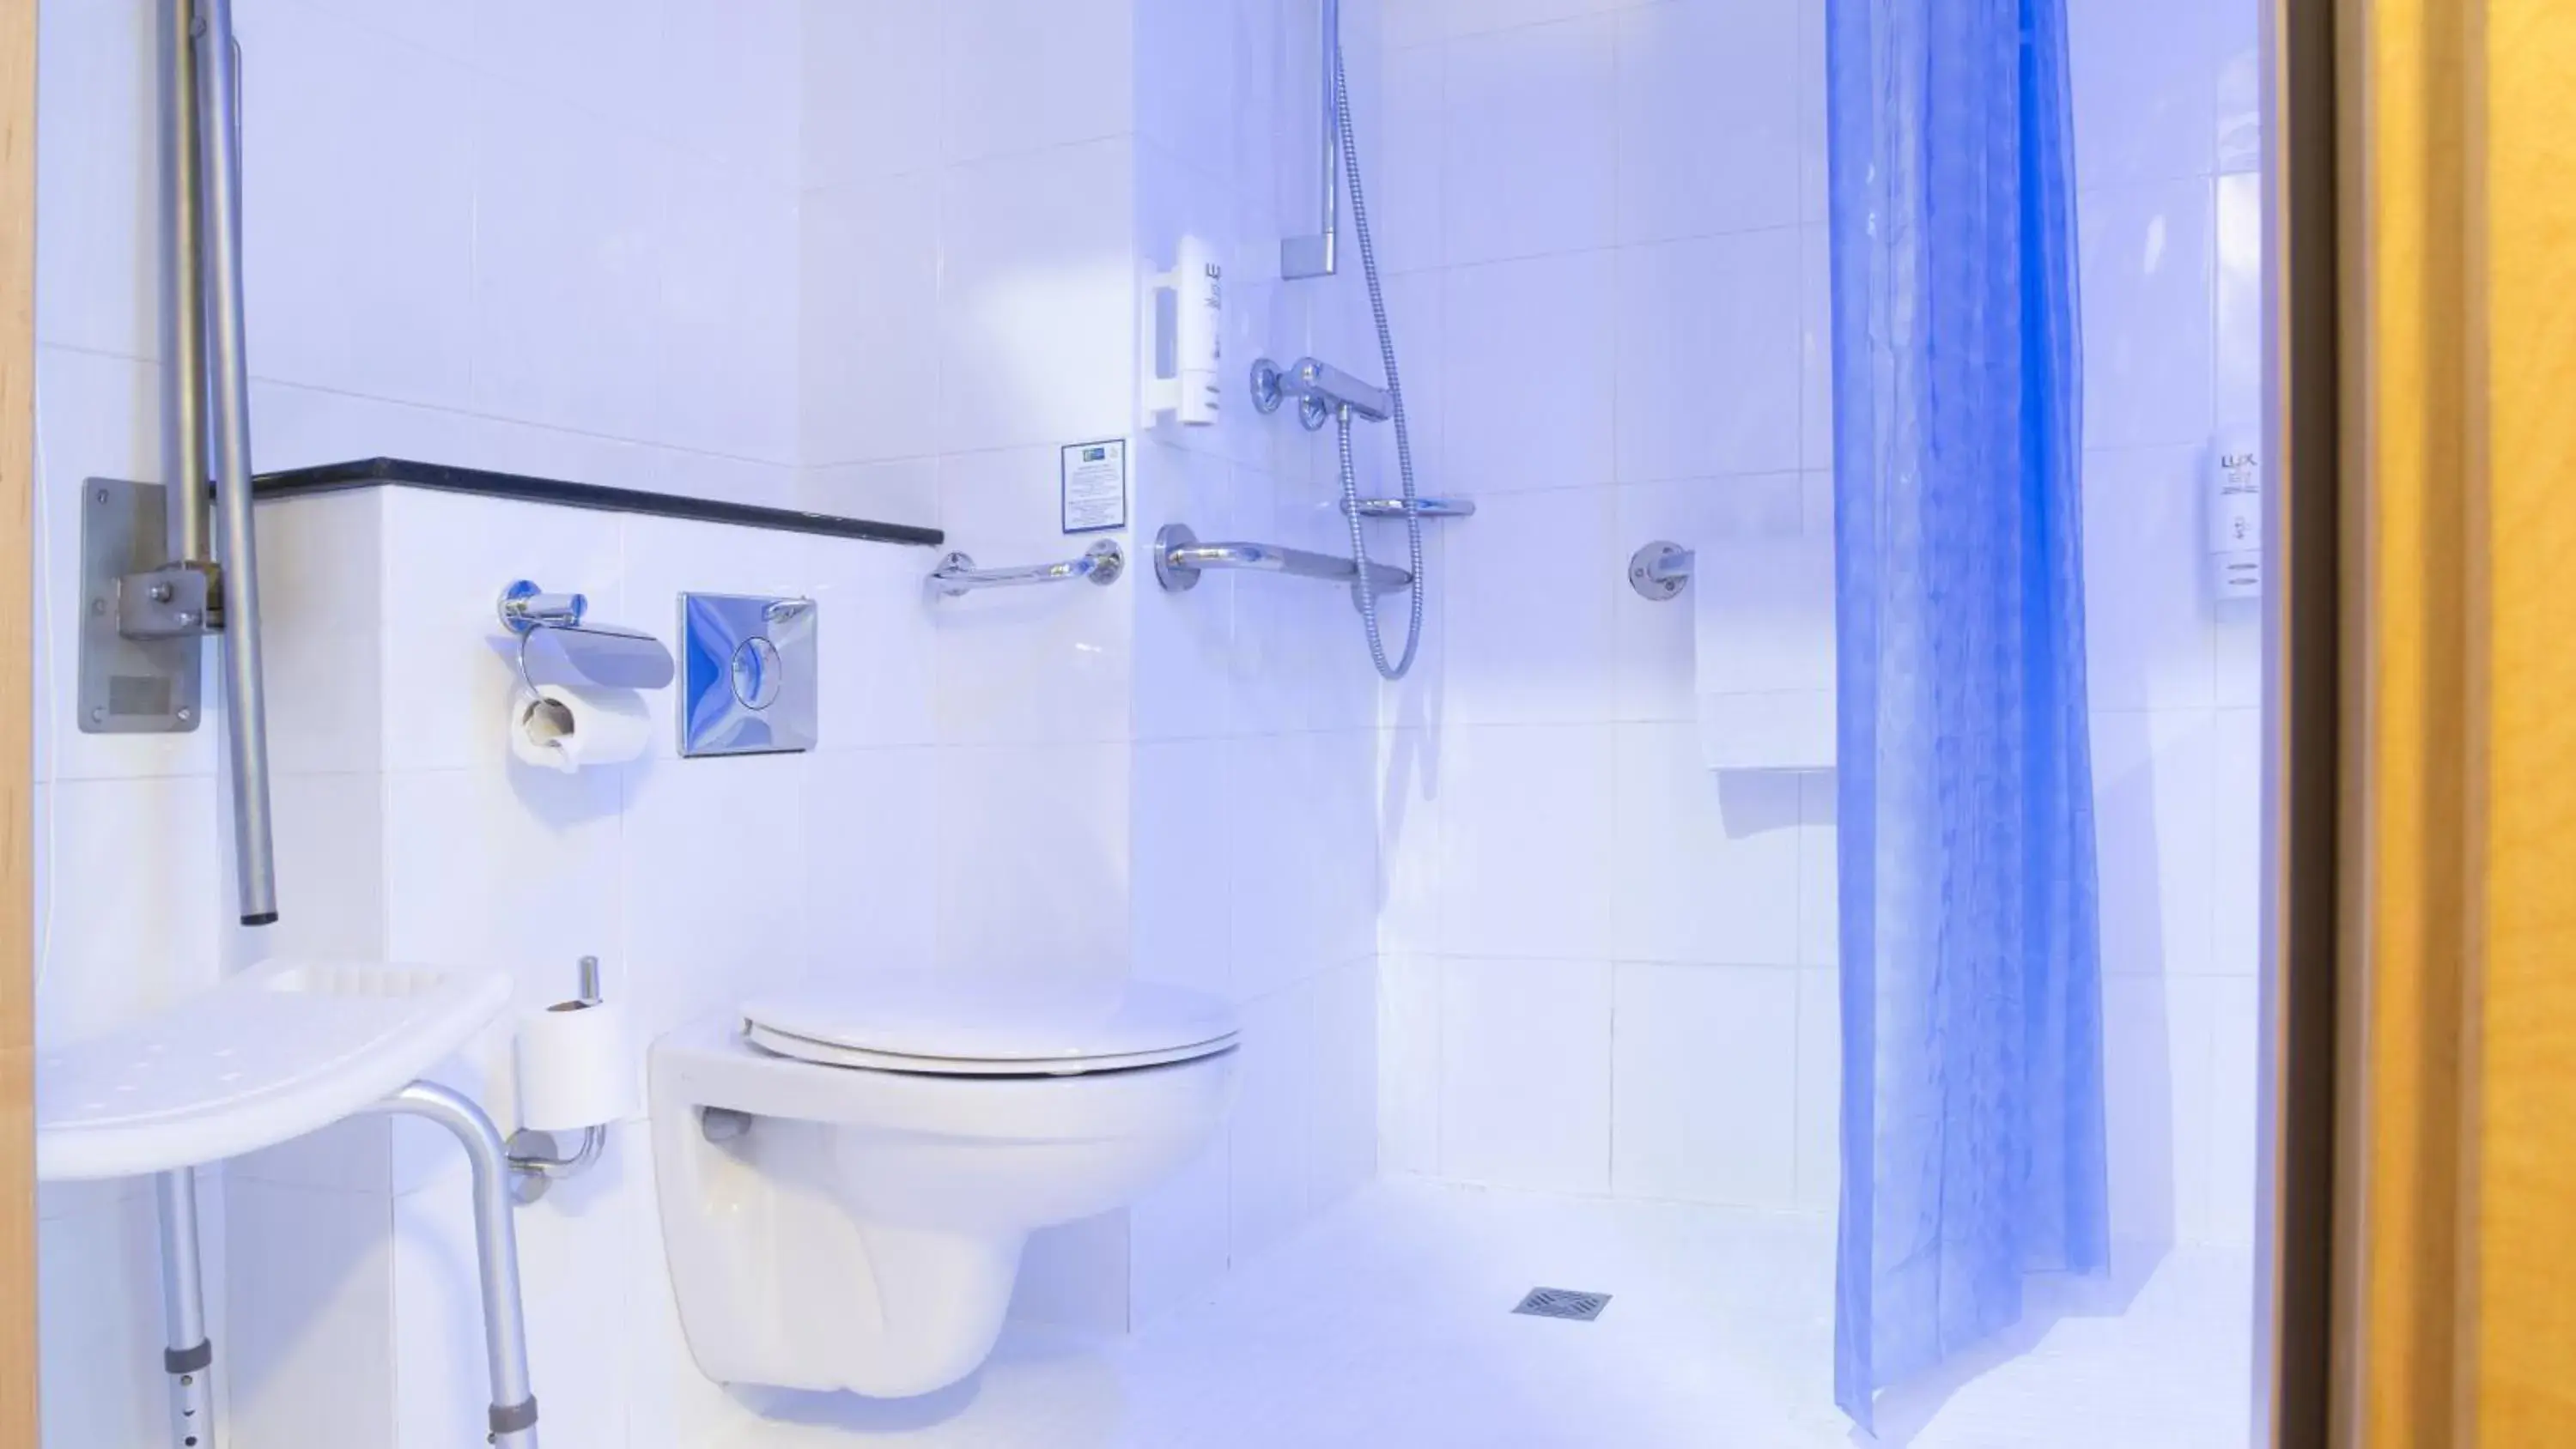 Facility for disabled guests, Bathroom in Holiday Inn Express Madrid-Getafe